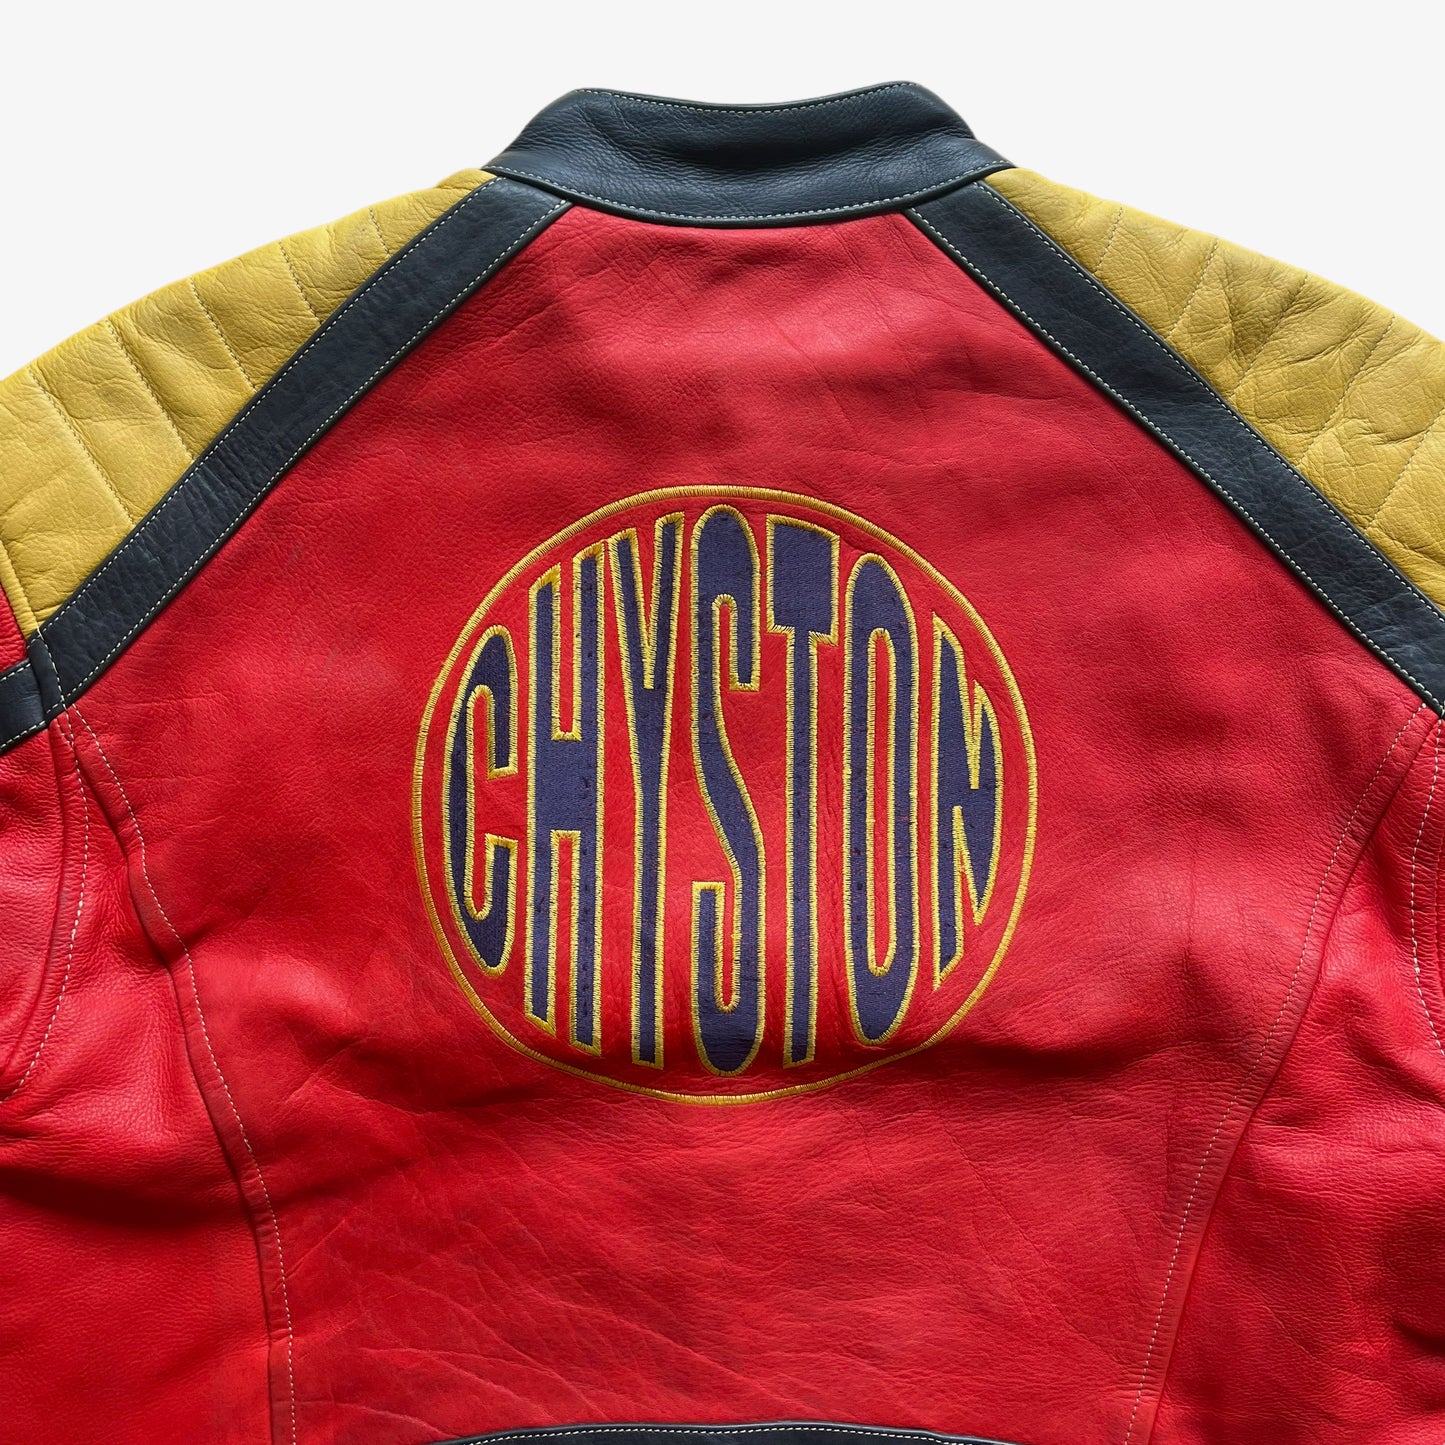 Vintage 1980s Chyston Red Leather Racing Jacket Back Logo - Casspios Dream